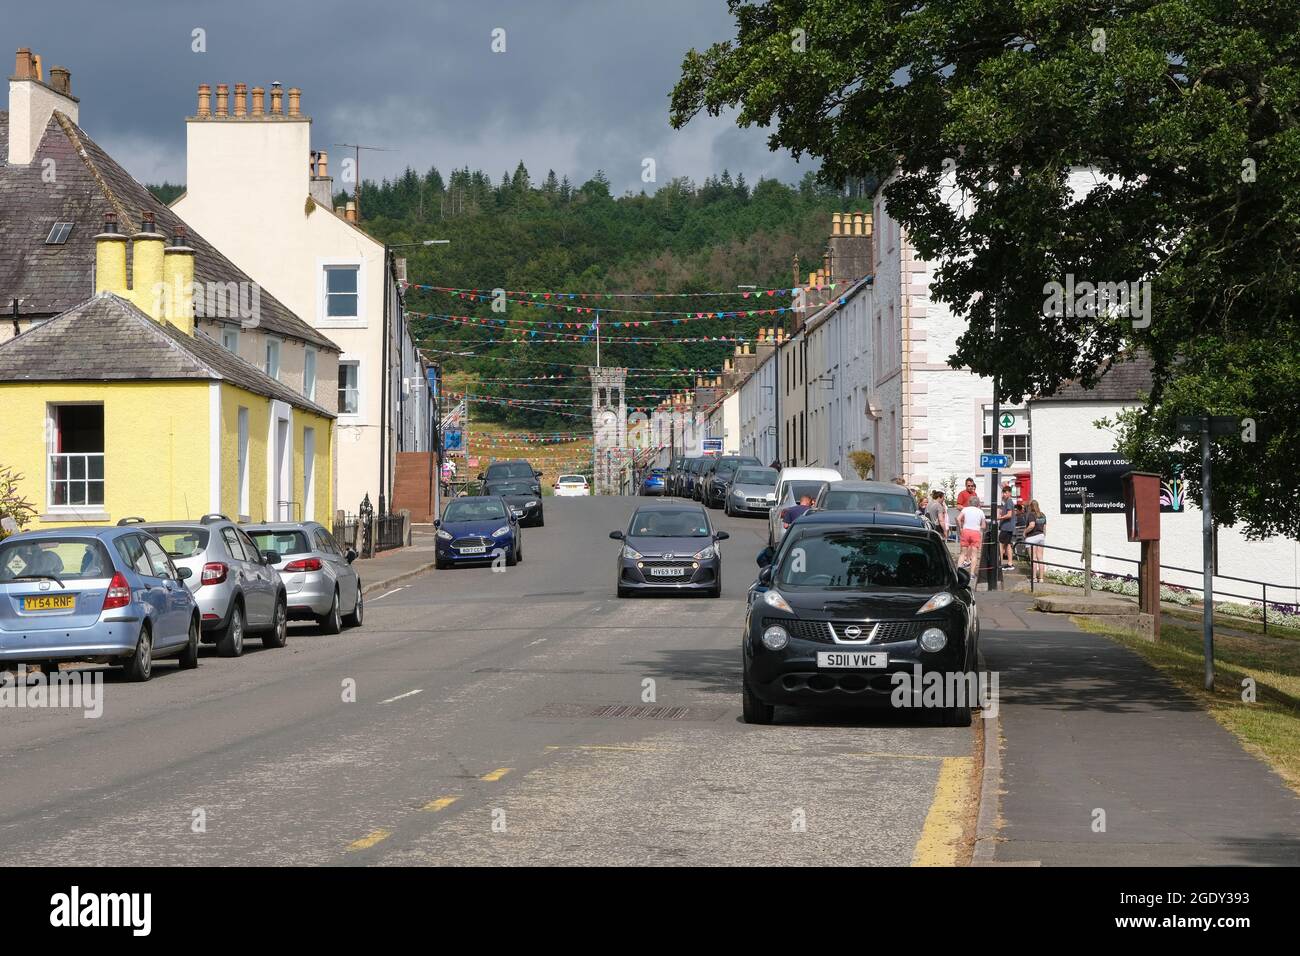 Gatehouse of Fleet, Scotland - August 15th 2021: The High Street in the town of Gatehouse of Fleet during Gala Week, Dumfries and Galloway, Scotland Stock Photo